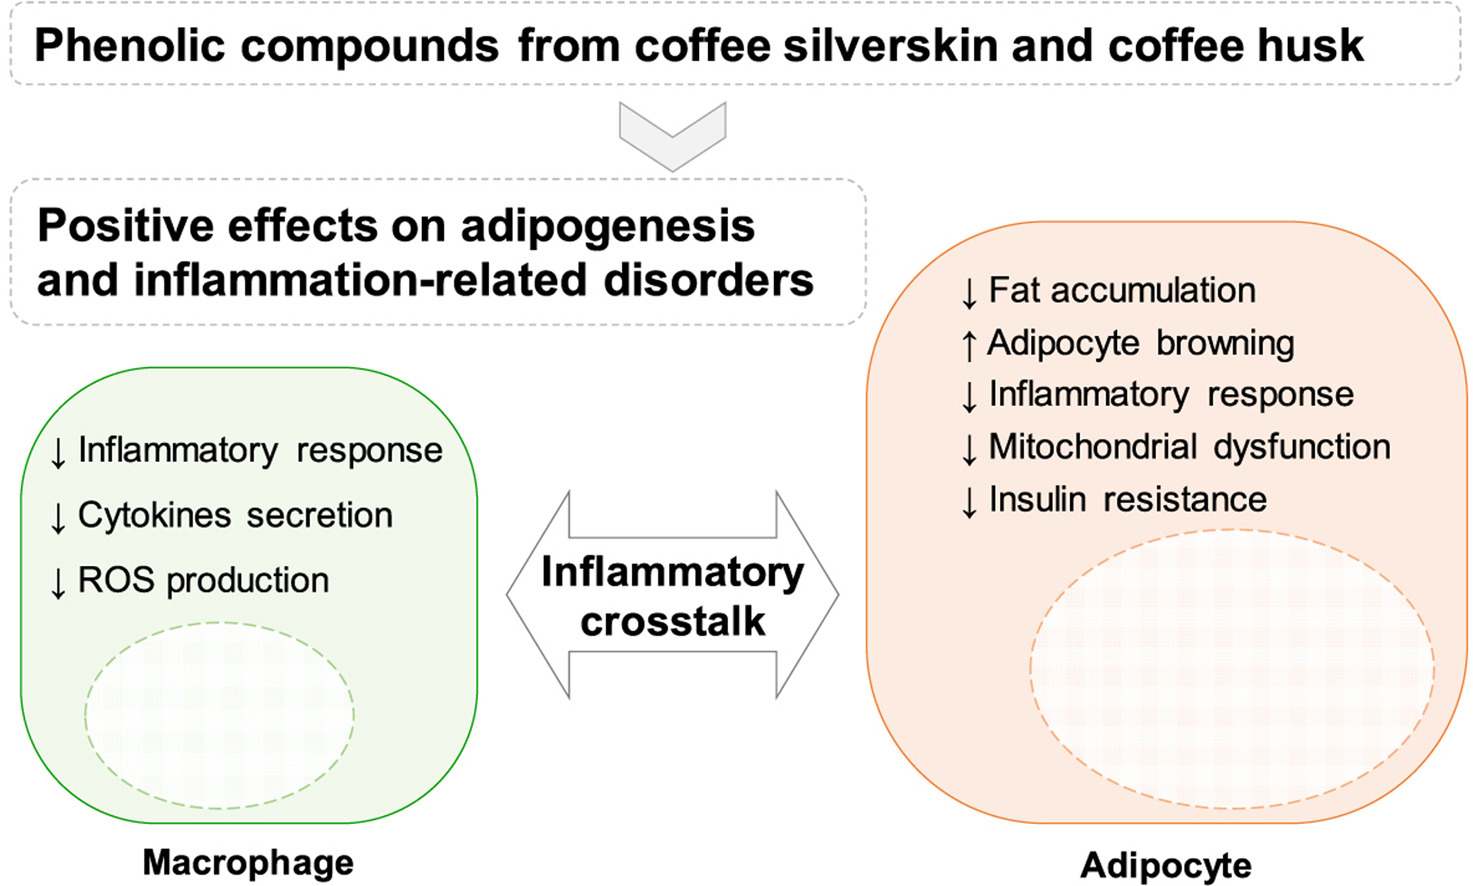 Phenolic compounds from coffee by-products modulate adipogenesis-related inflammation, mitochondrial dysfunction, and insulin resistance in adipocytes, via insulin/PI3K/AKT signaling pathways